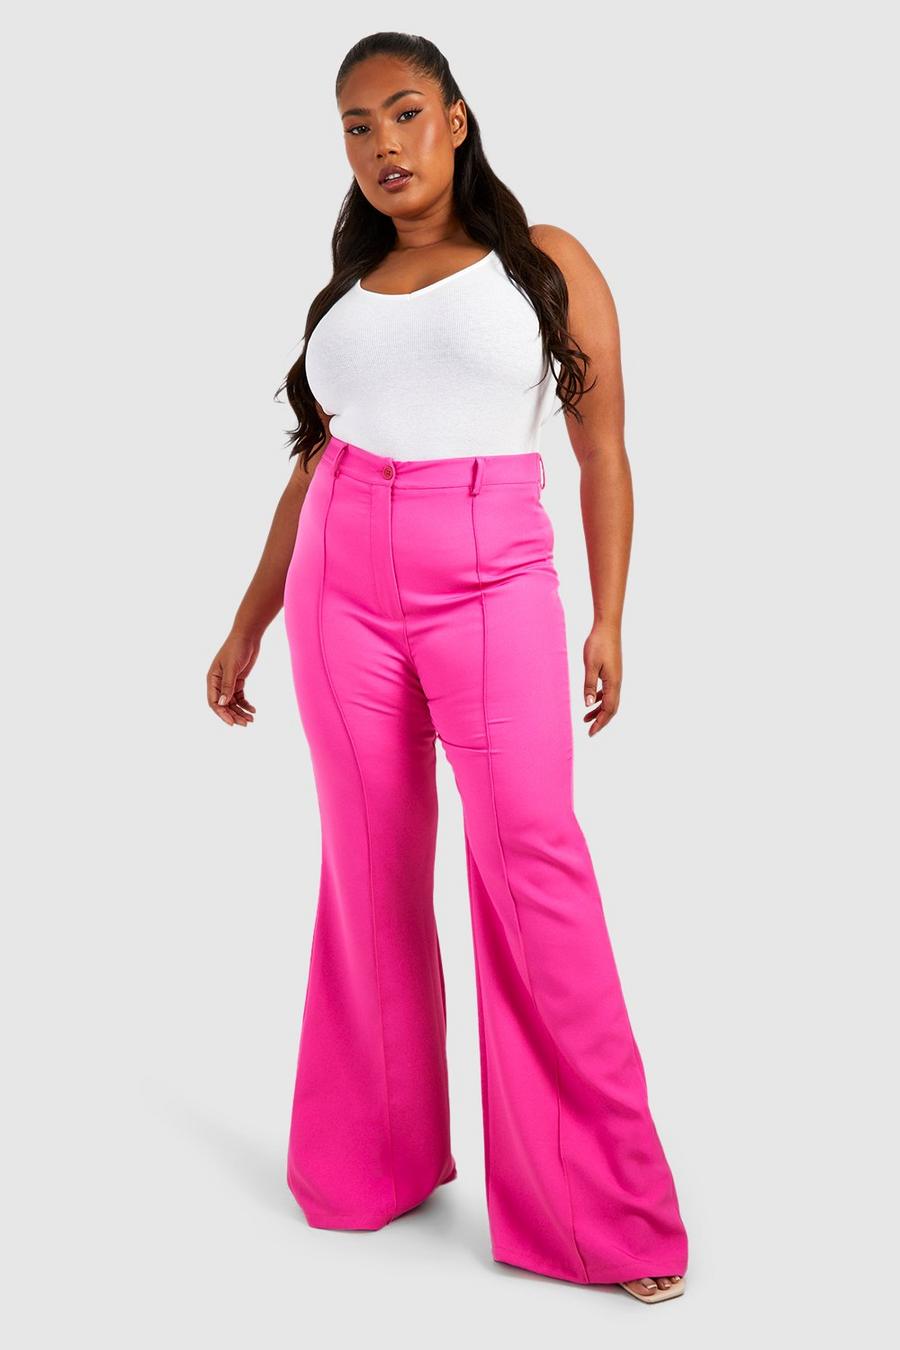 Plus Size Trousers, Womens Plus Size Trousers